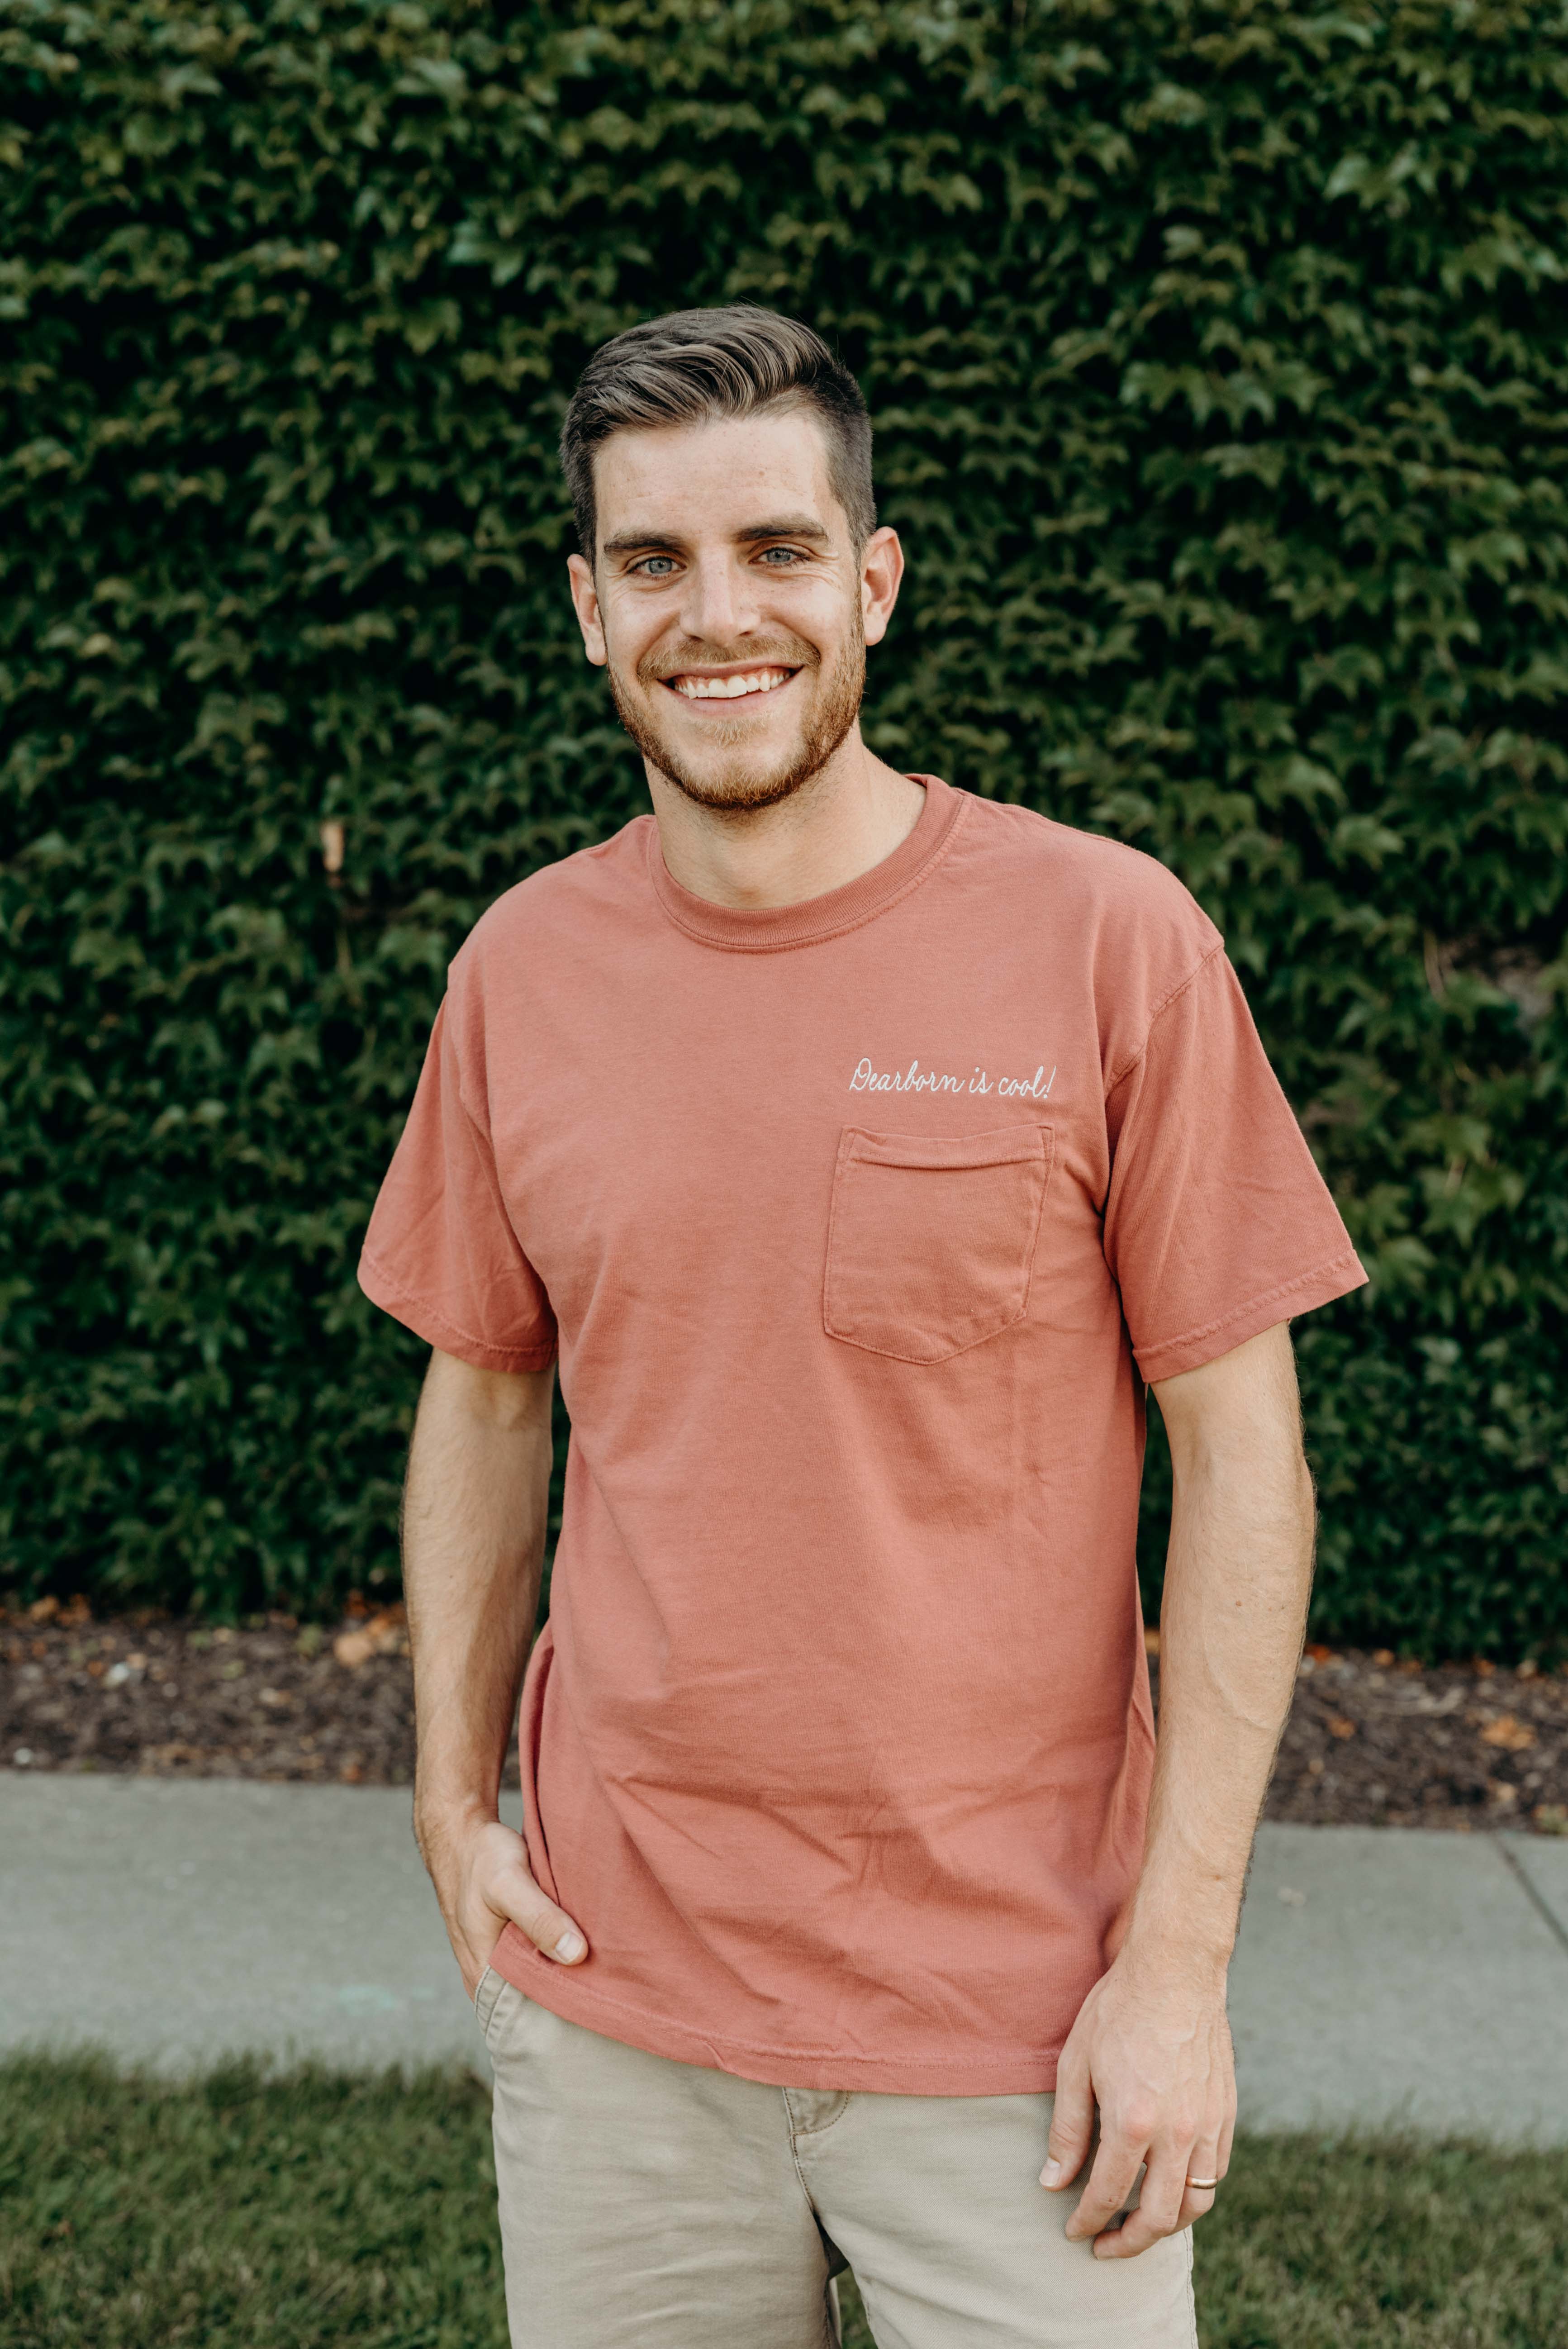 Embroidered pocket tee | Dearborn is Cool